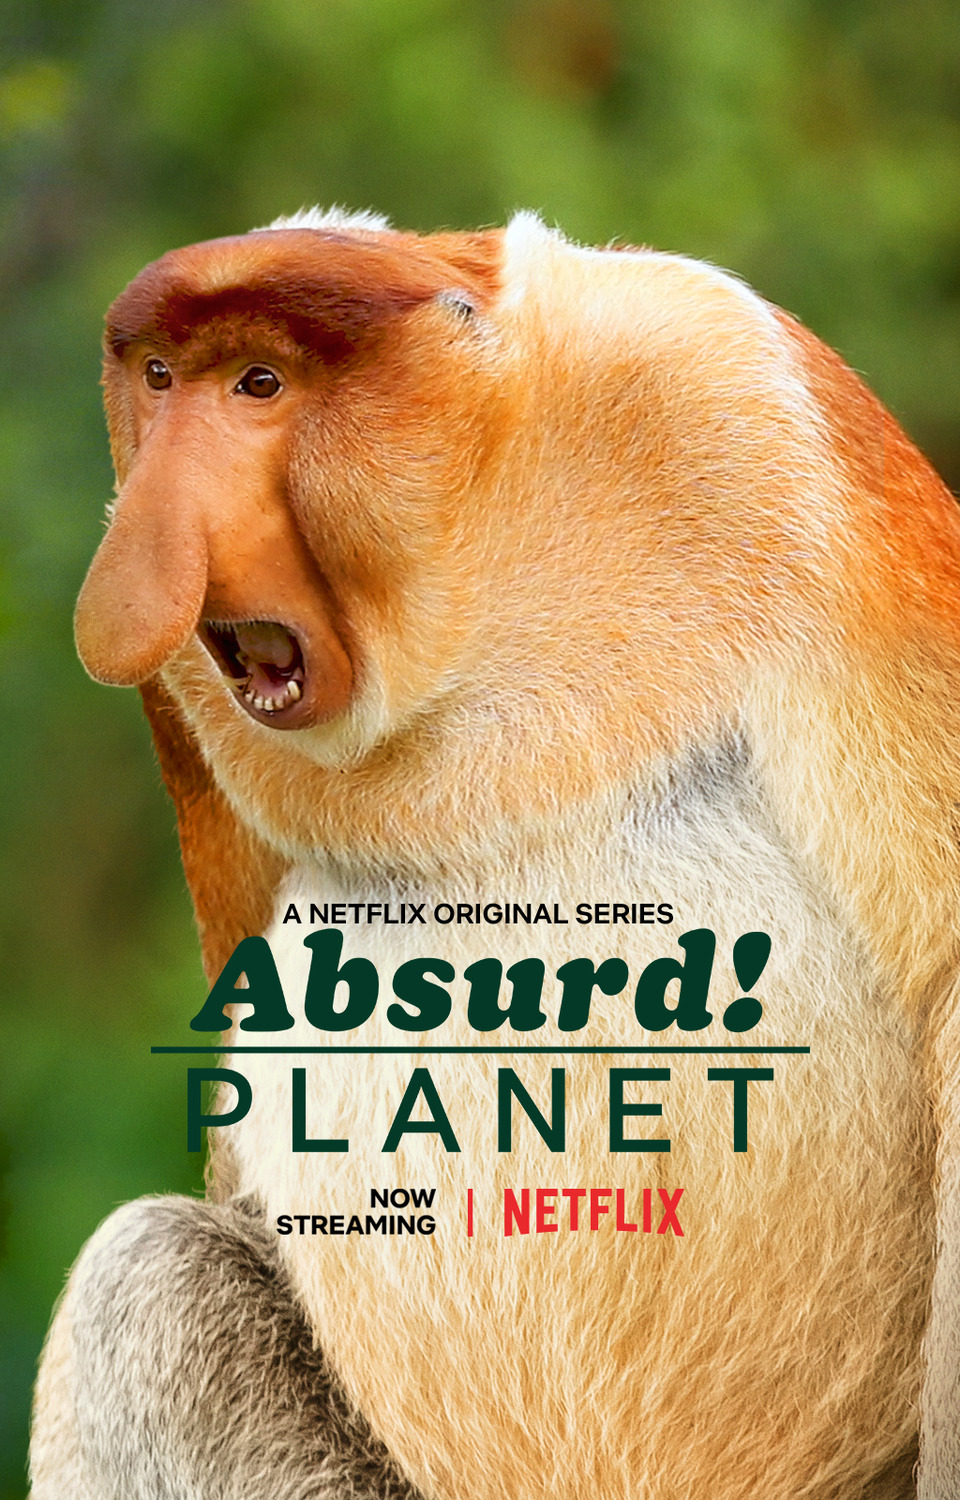 Extra Large TV Poster Image for Absurd Planet 